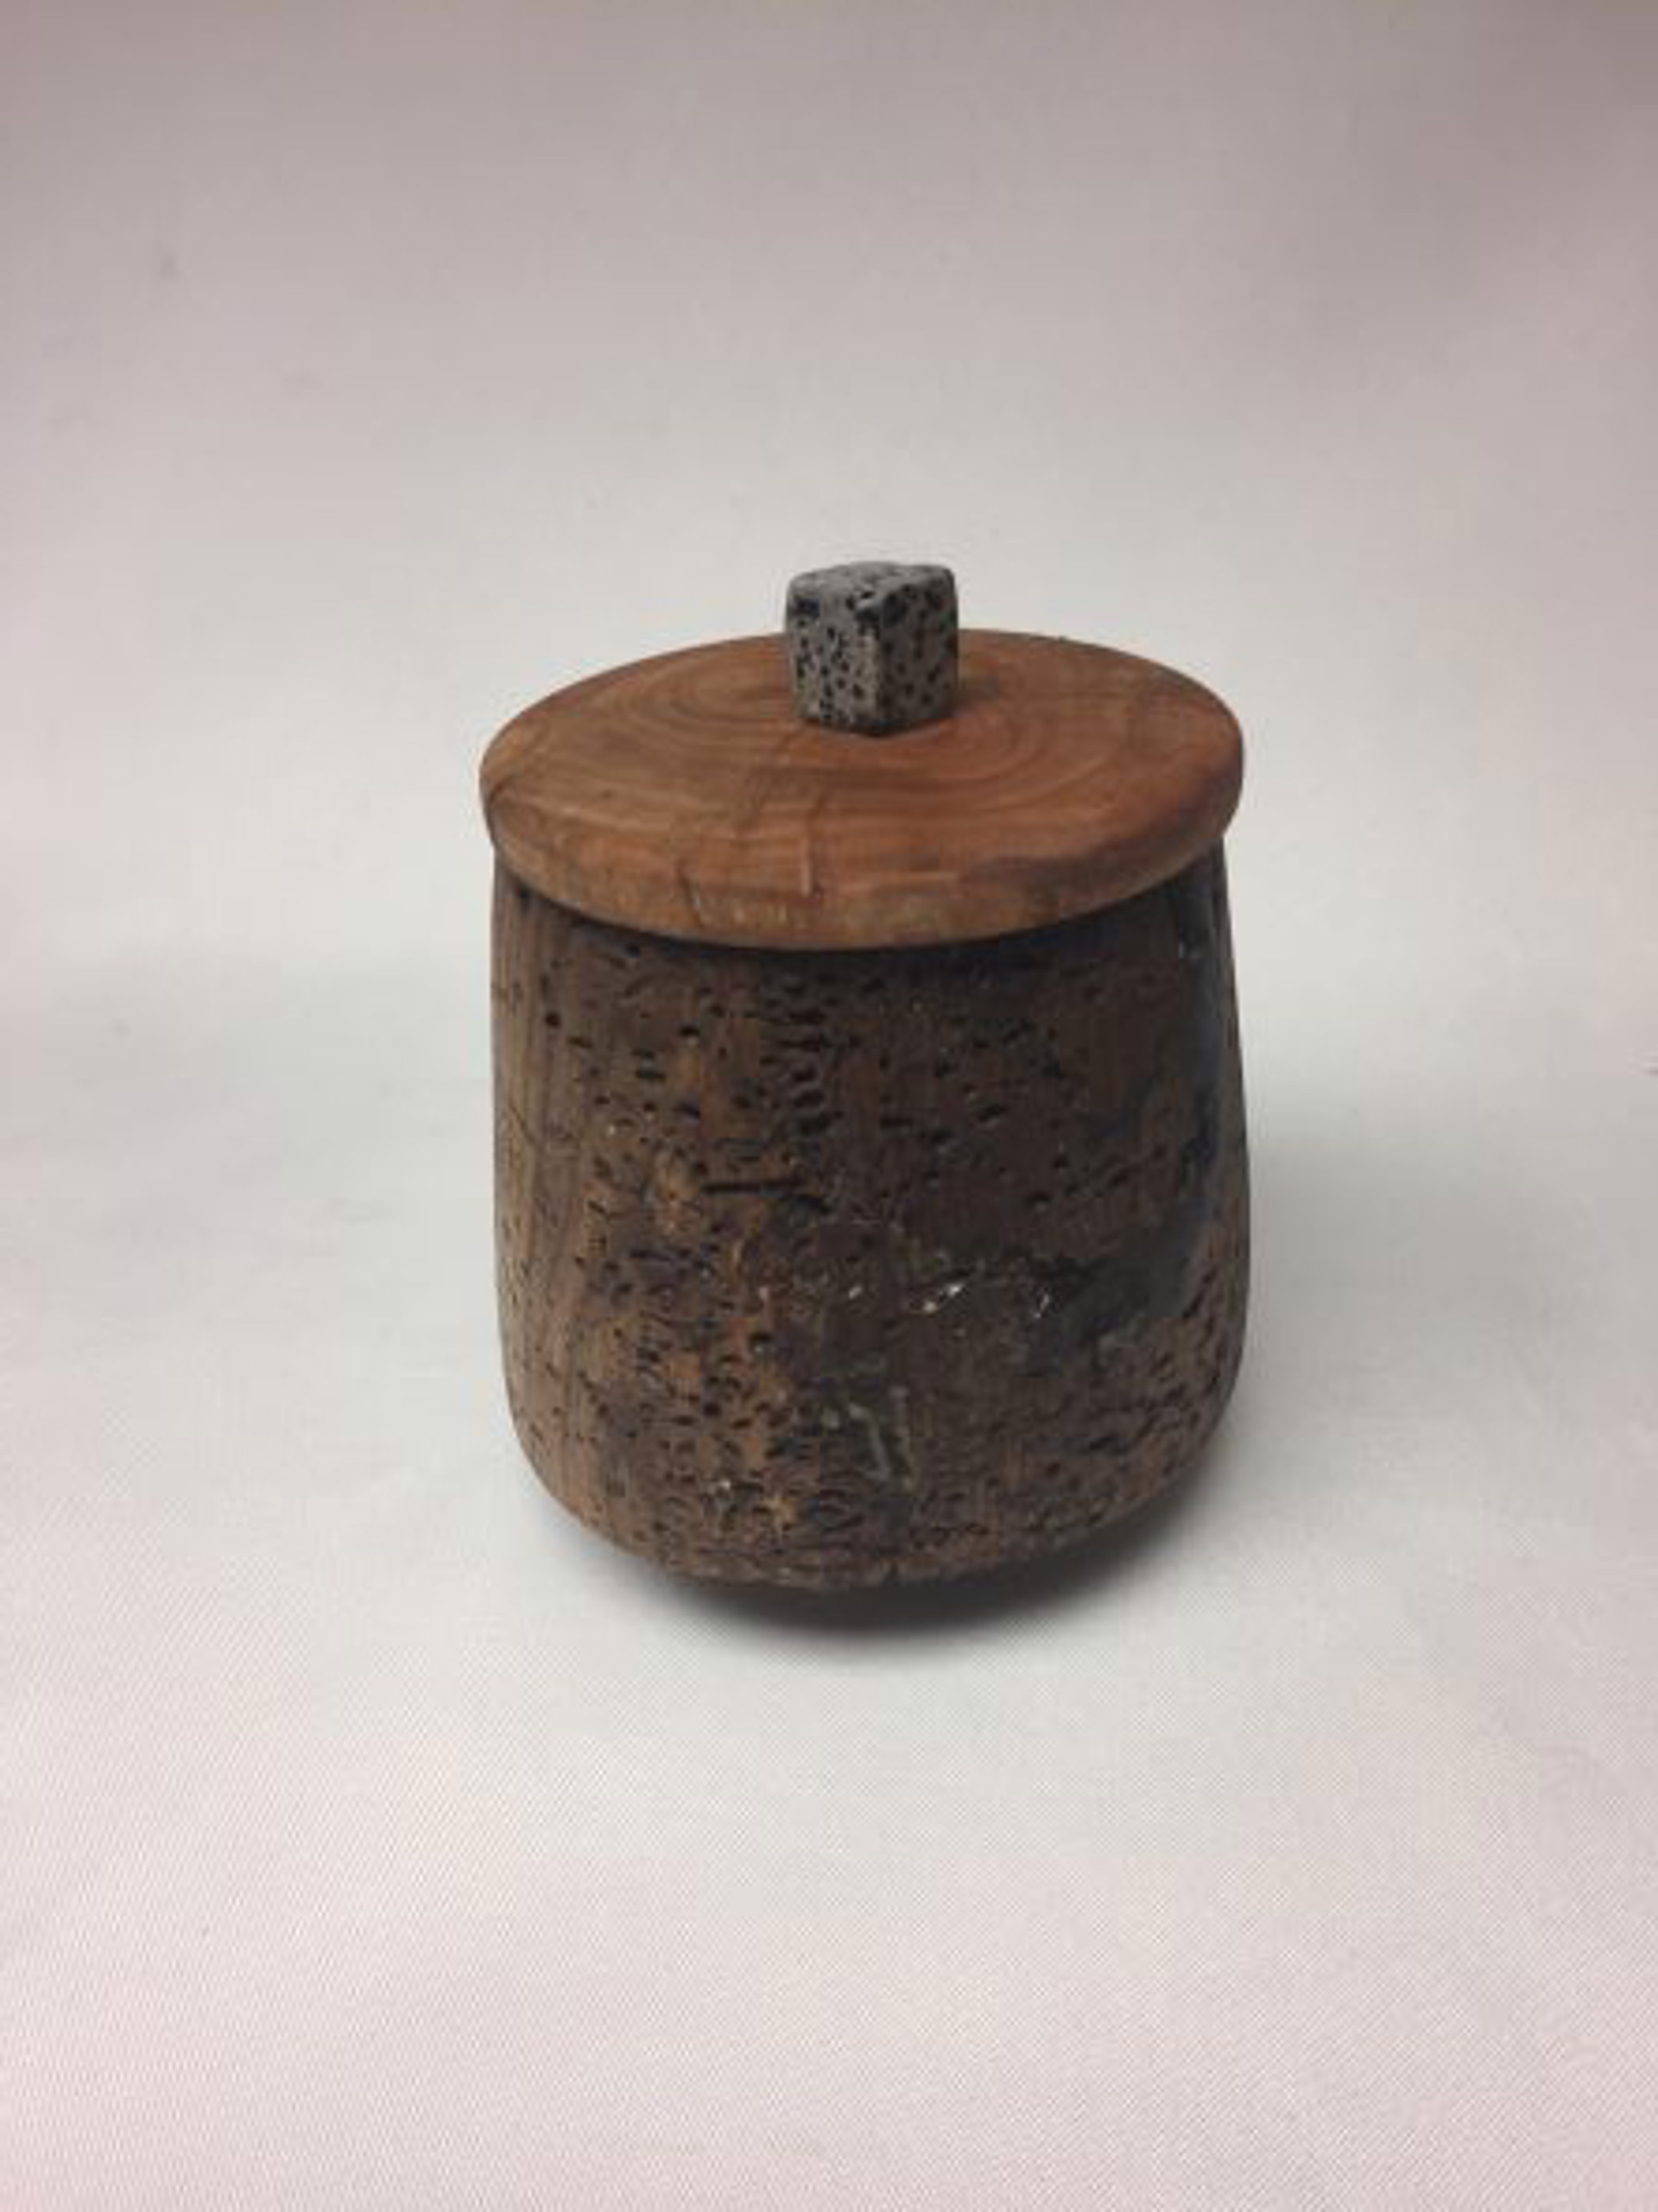 Turned Wood Jar W/Lid 21-104 by Rick Squires